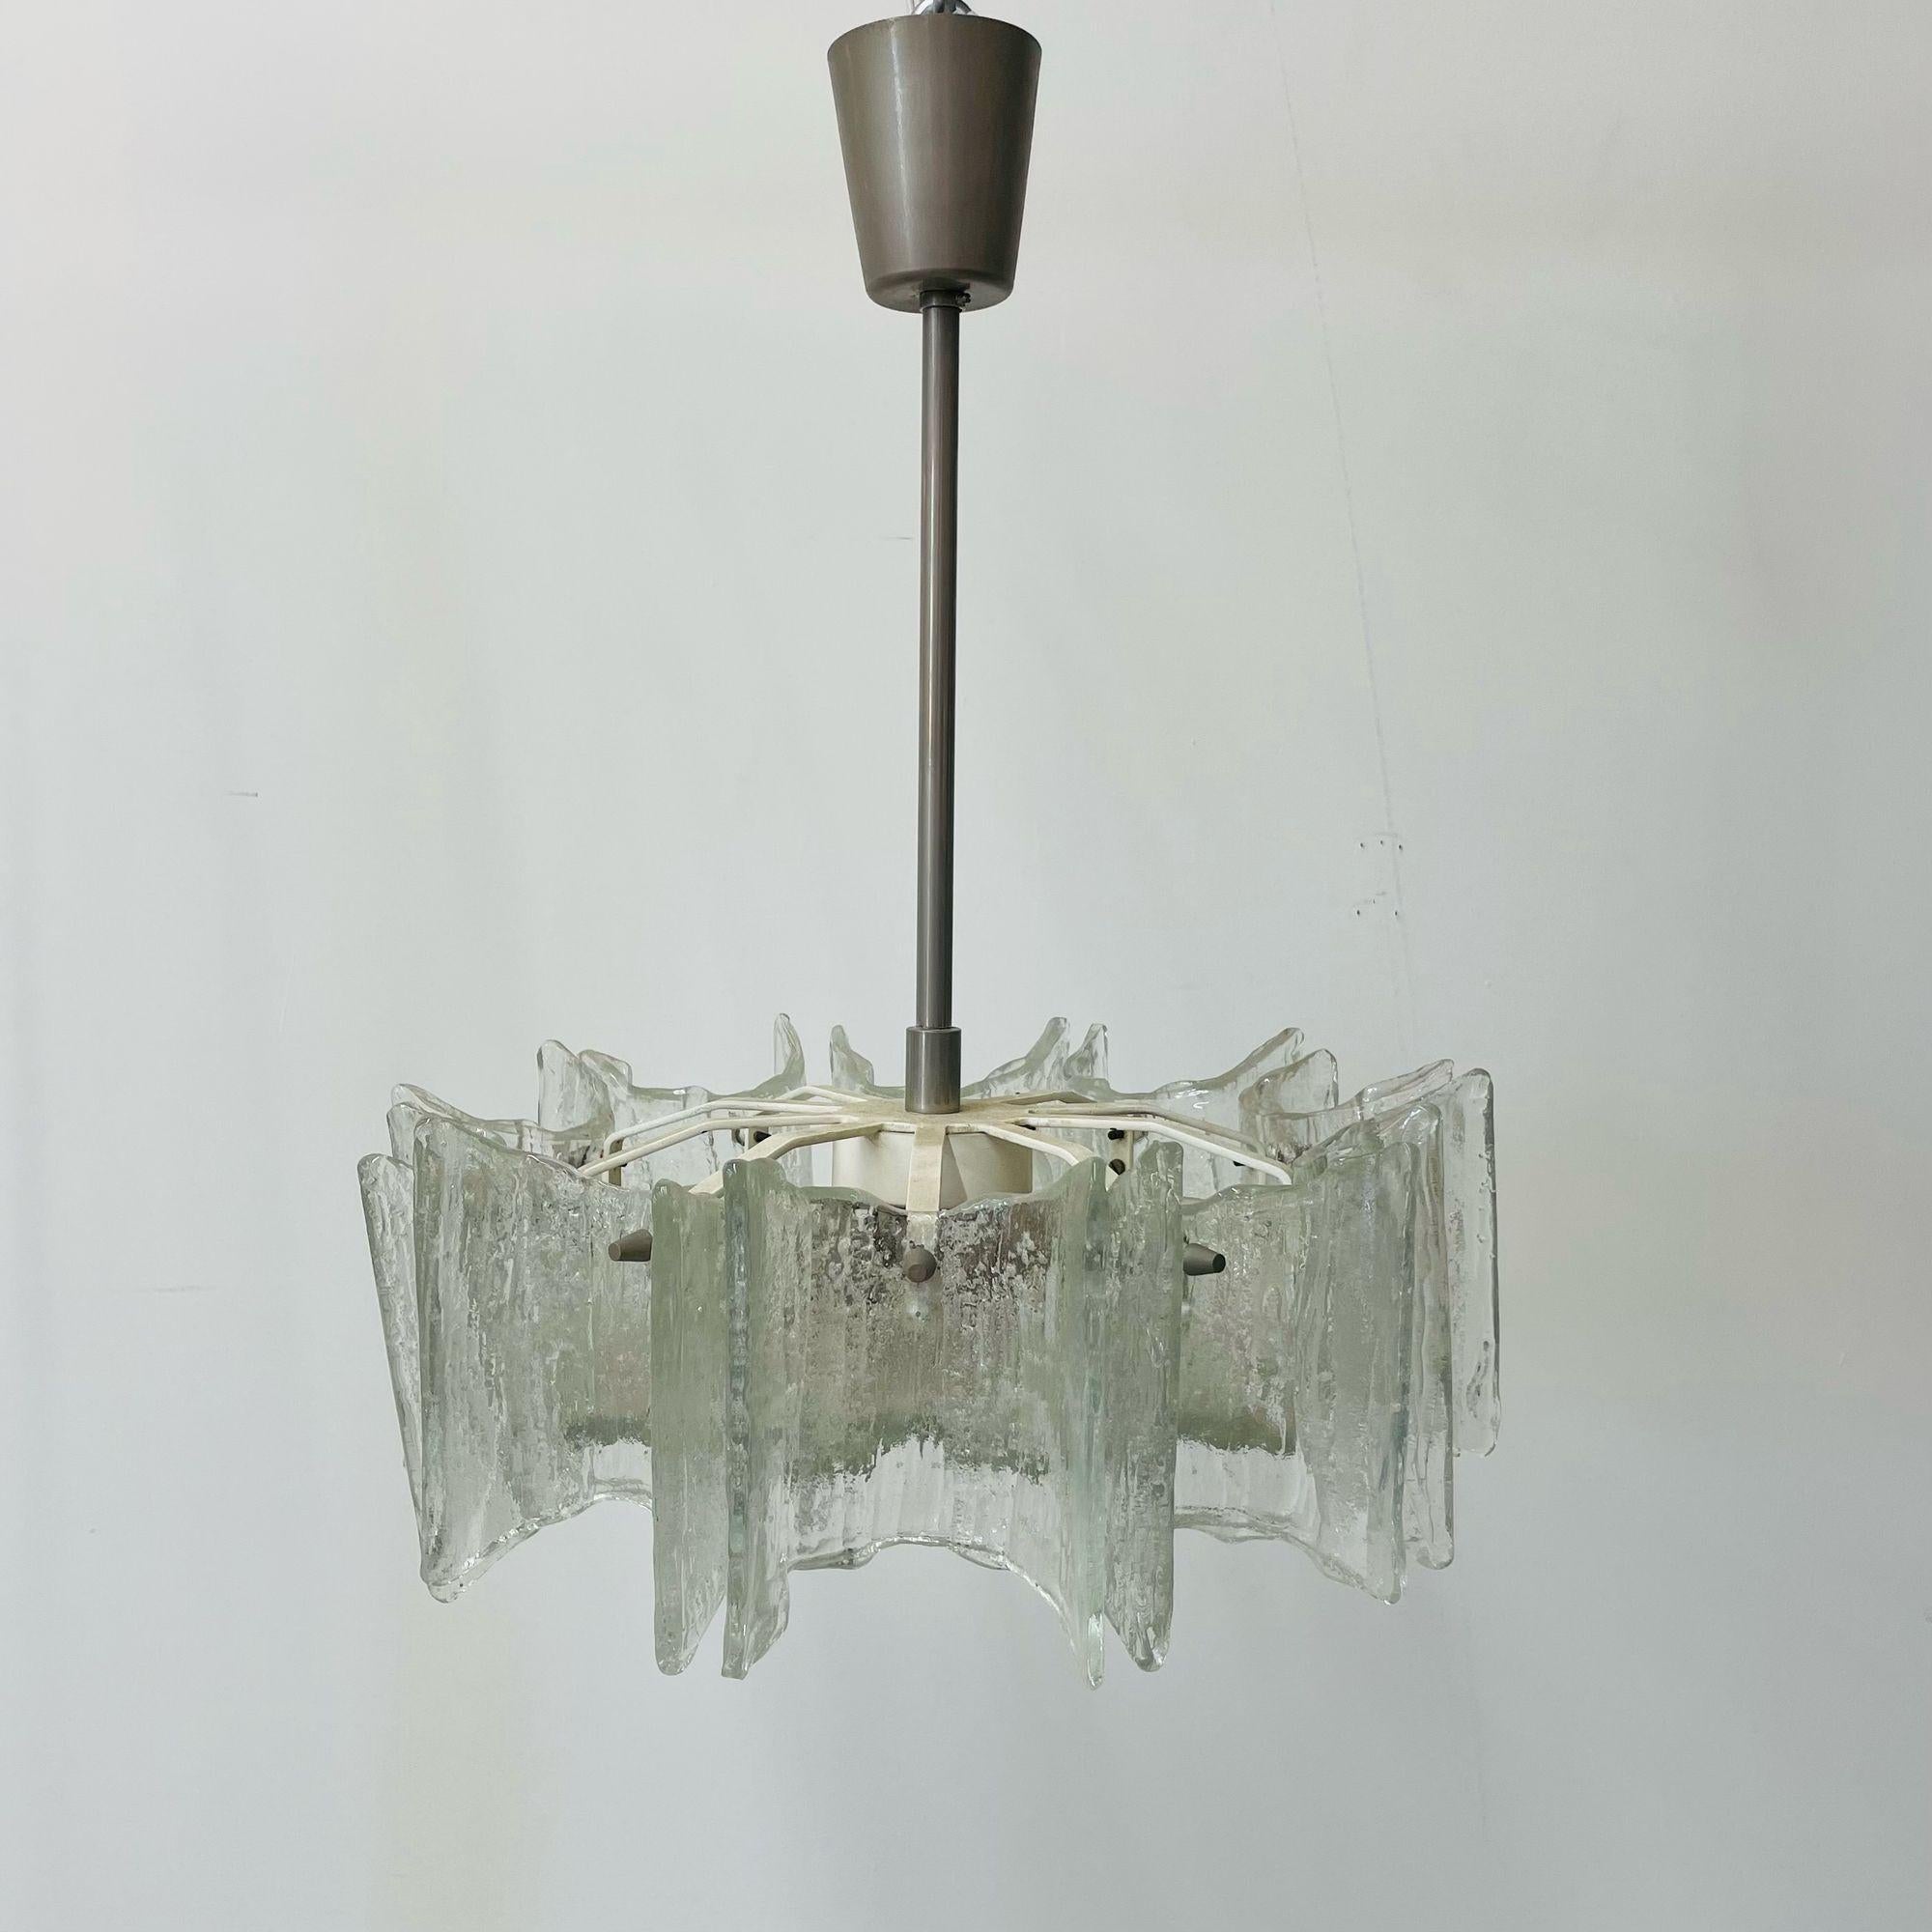 Small Swedish Mid-Century Modern Chandelier / Pendant, Slumped Glass and Brass For Sale 4